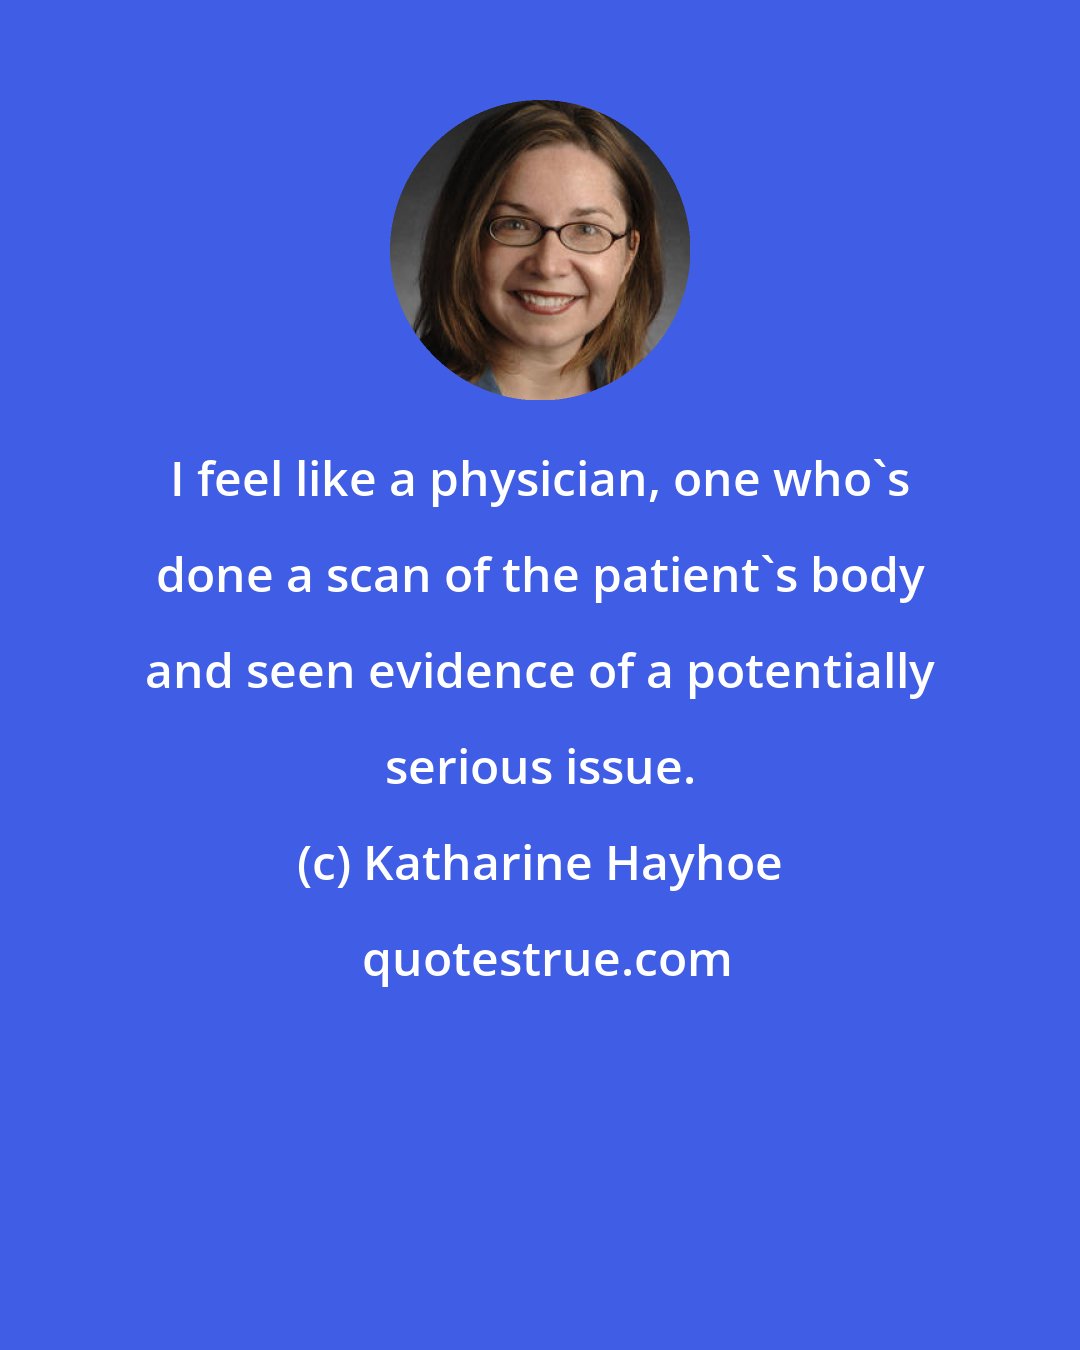 Katharine Hayhoe: I feel like a physician, one who's done a scan of the patient's body and seen evidence of a potentially serious issue.